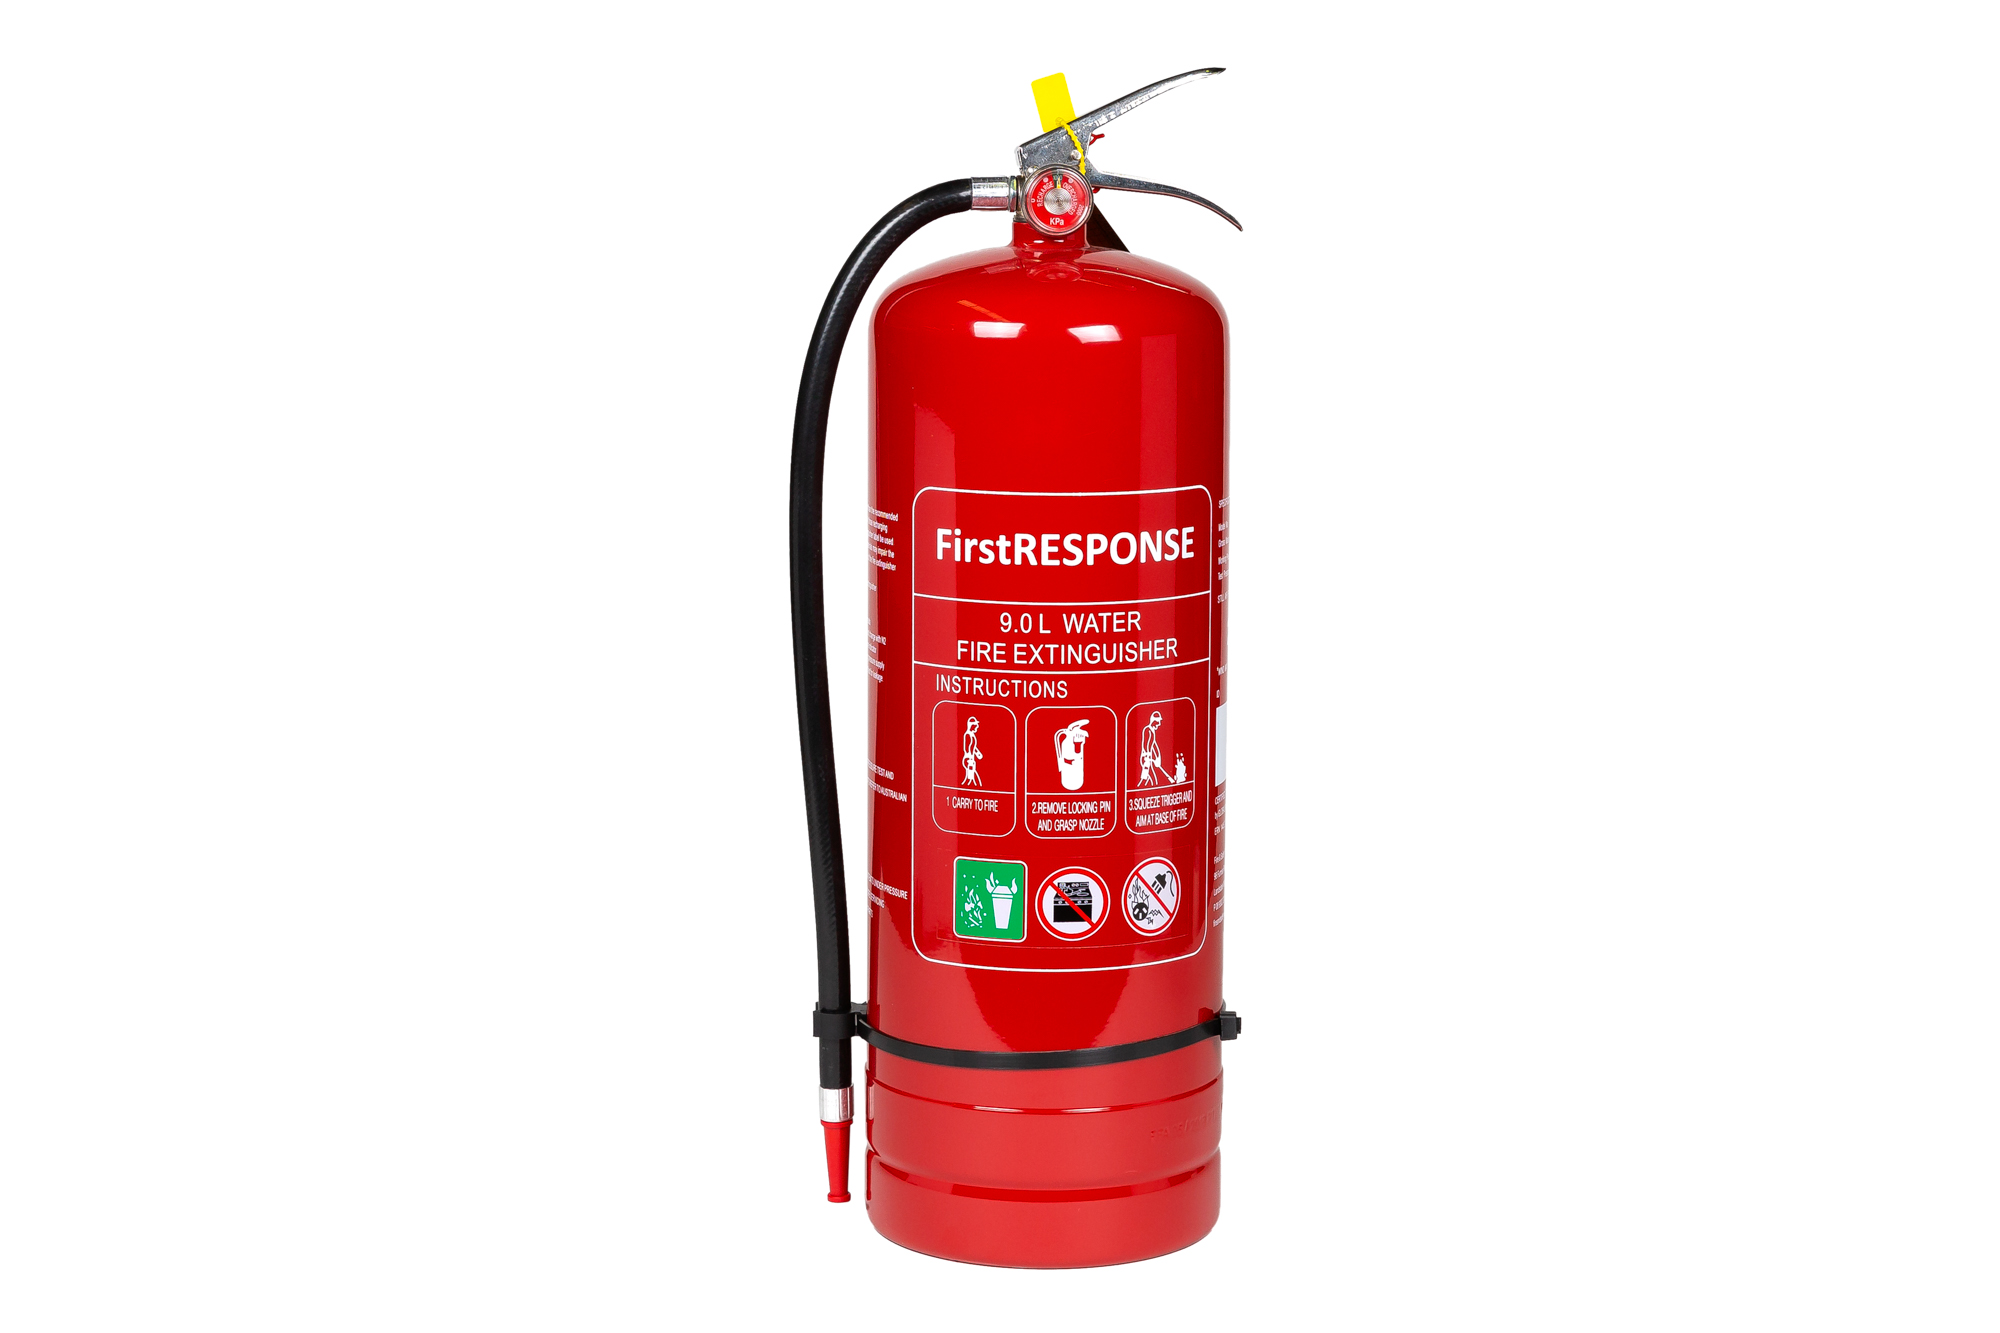 9.0L Water Fire Extinguisher – Fire & Safety WA